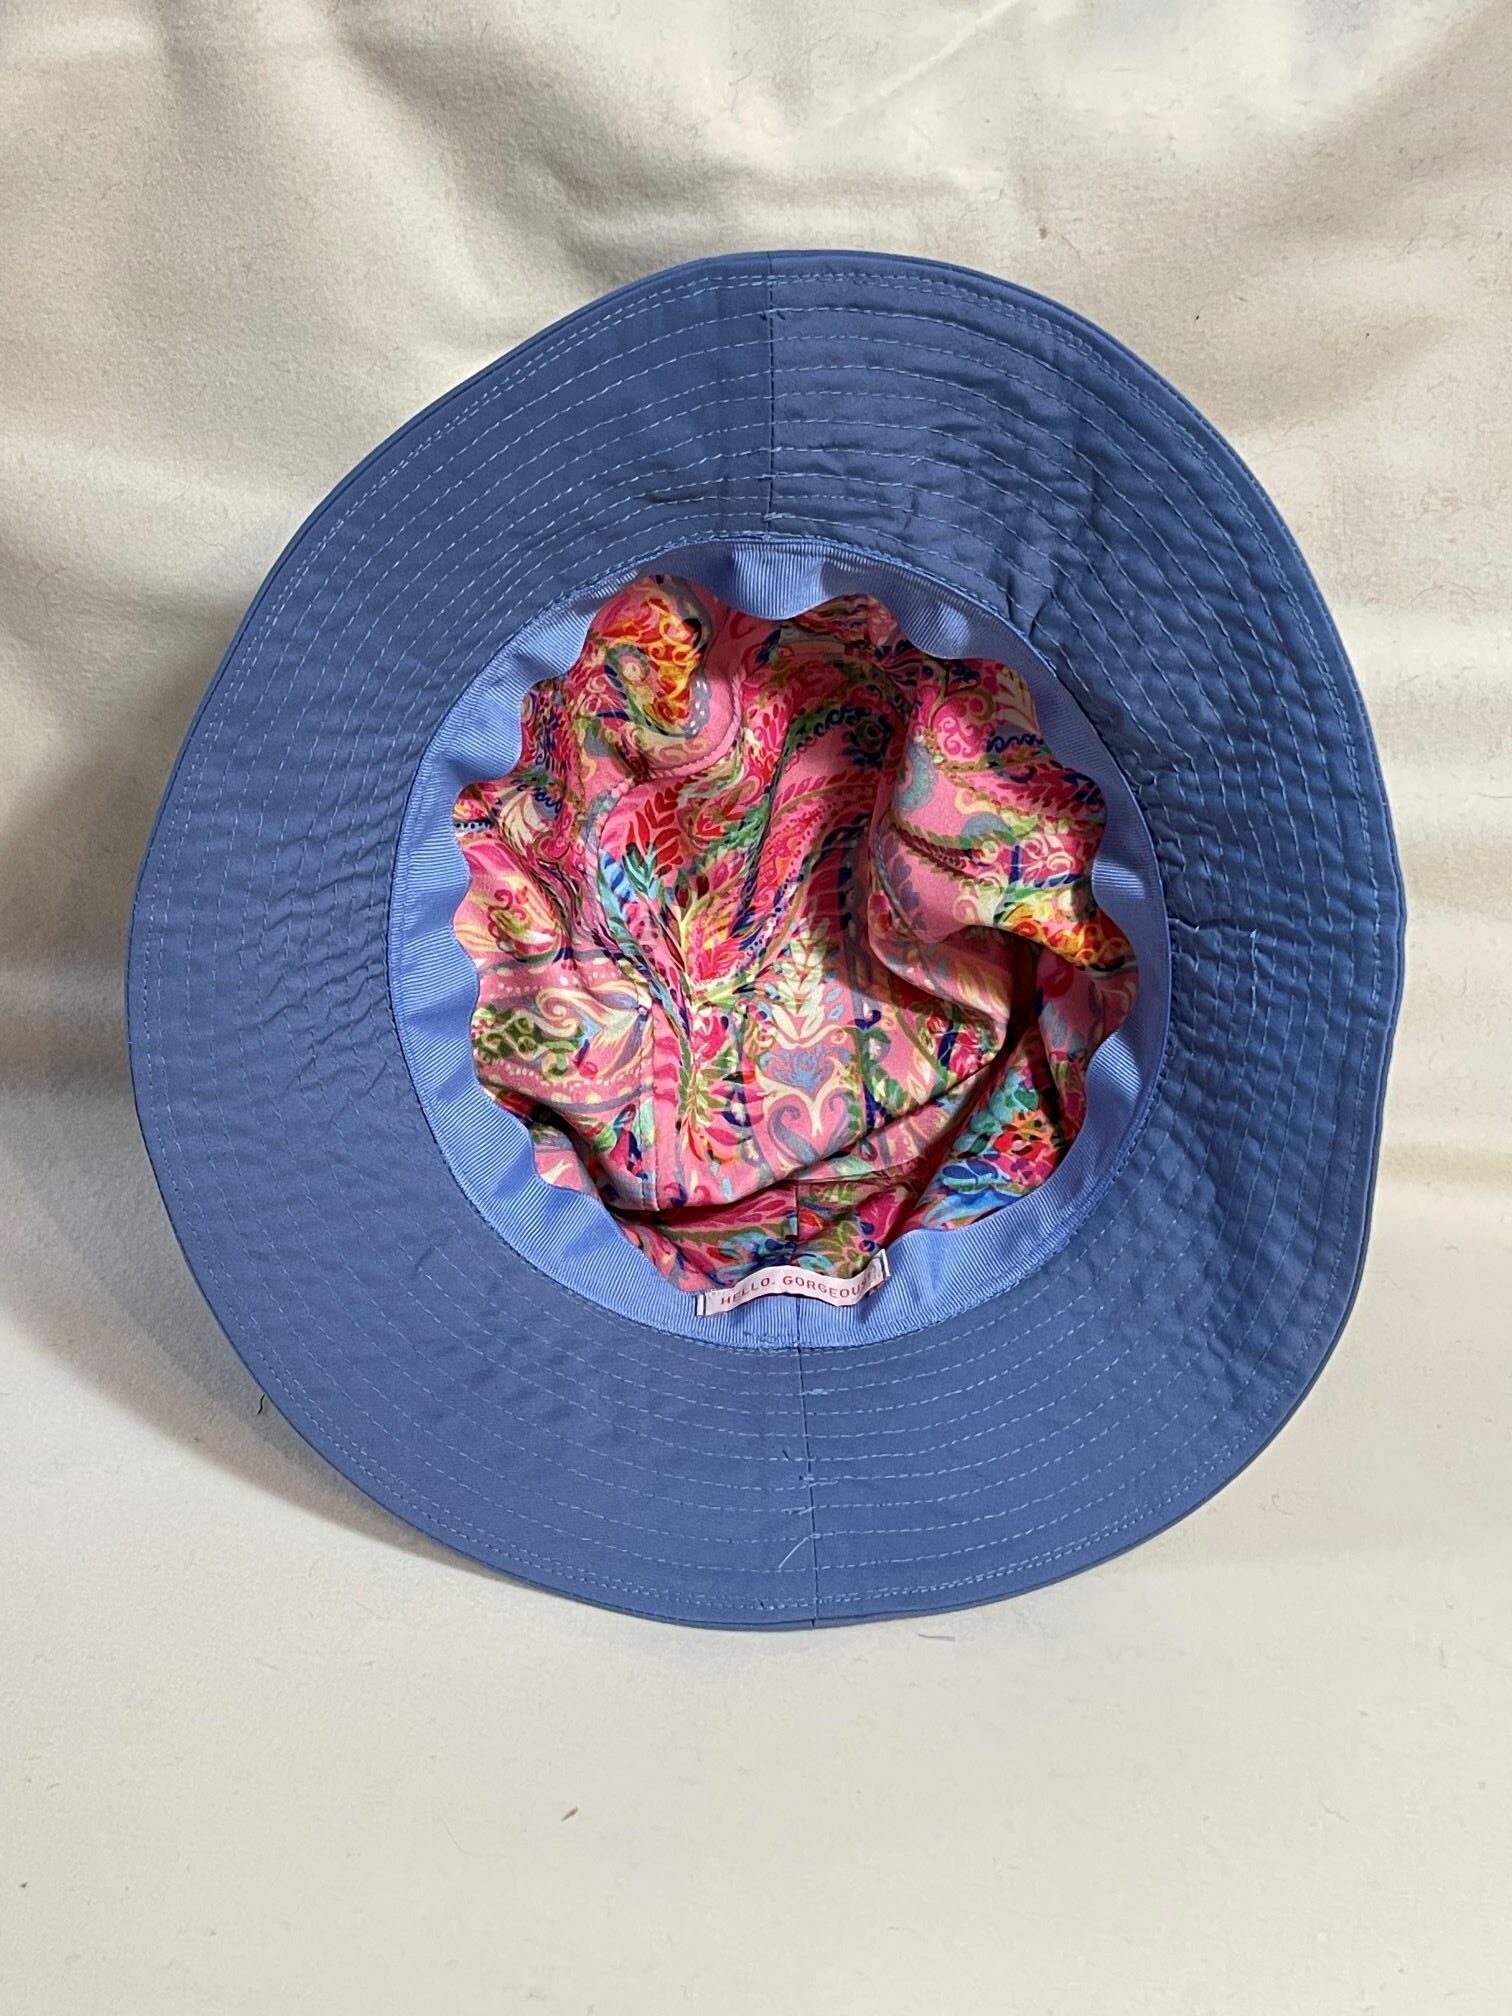 The inside of the bucket hat showing a vibrant pink paisley lining and a tag that reads "HELLO GORGEOUS" sewn to the inside of the brim